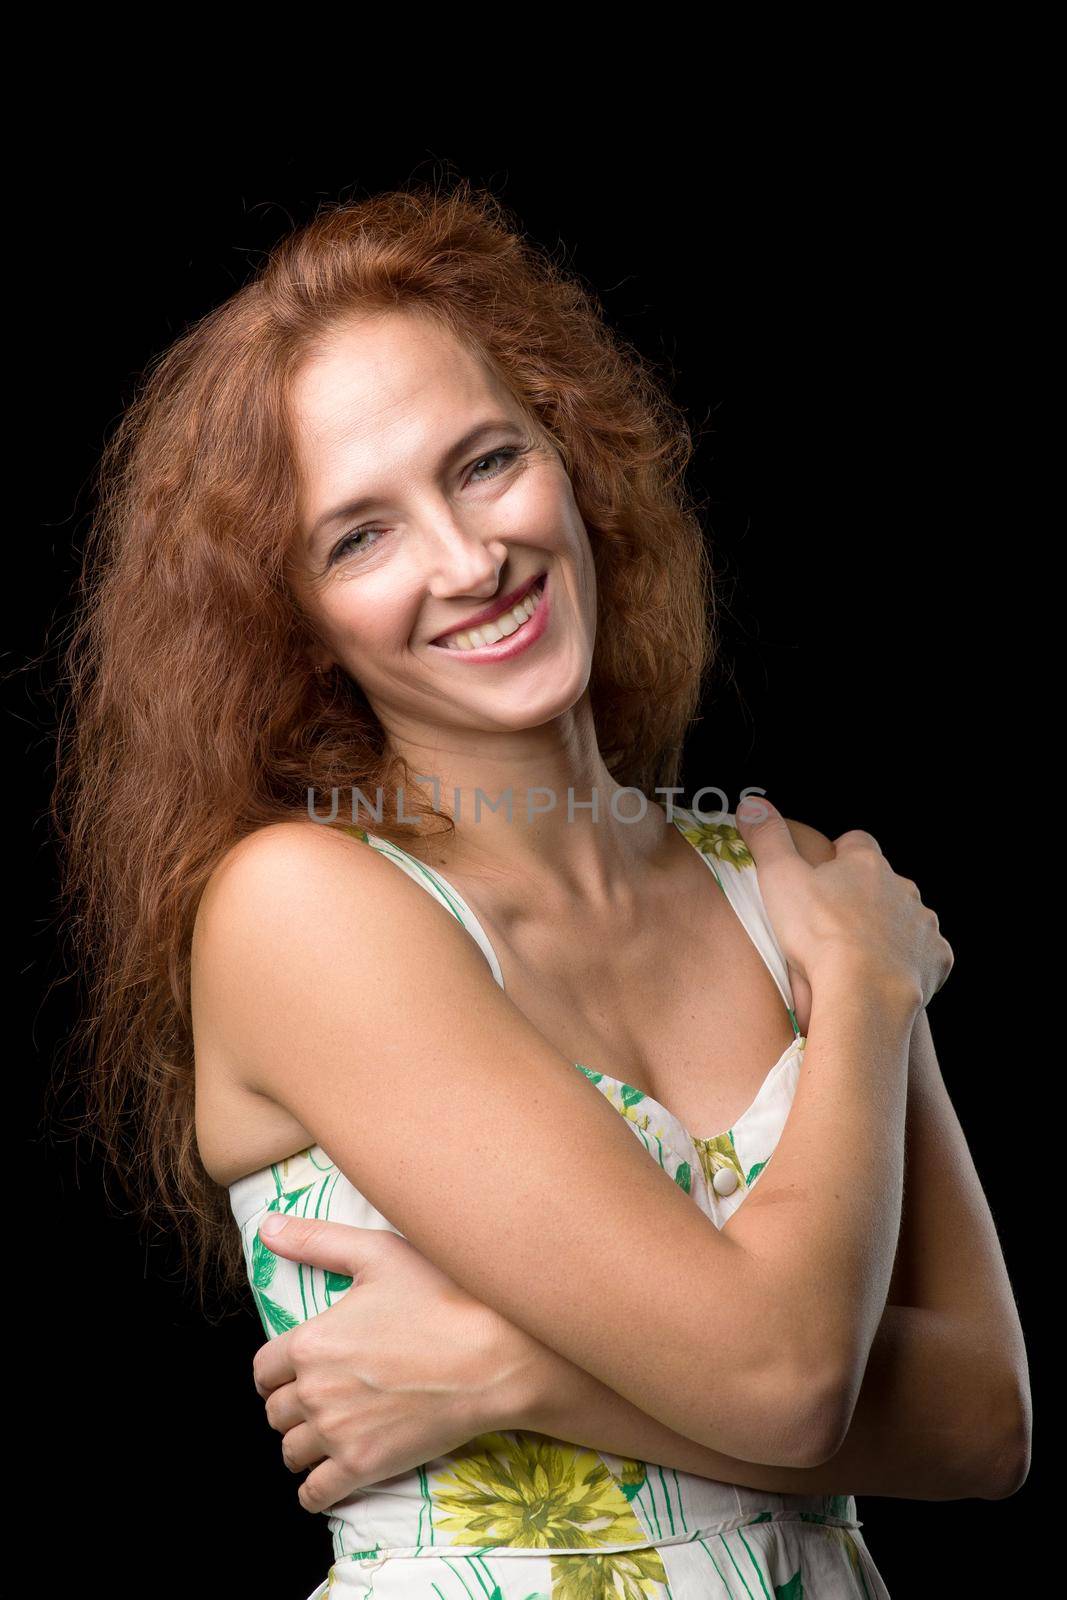 Beautiful smiling woman hugging herself. Cheerful young woman in floral sundress standing against black background. Portrait of dreaming girl posing in studio